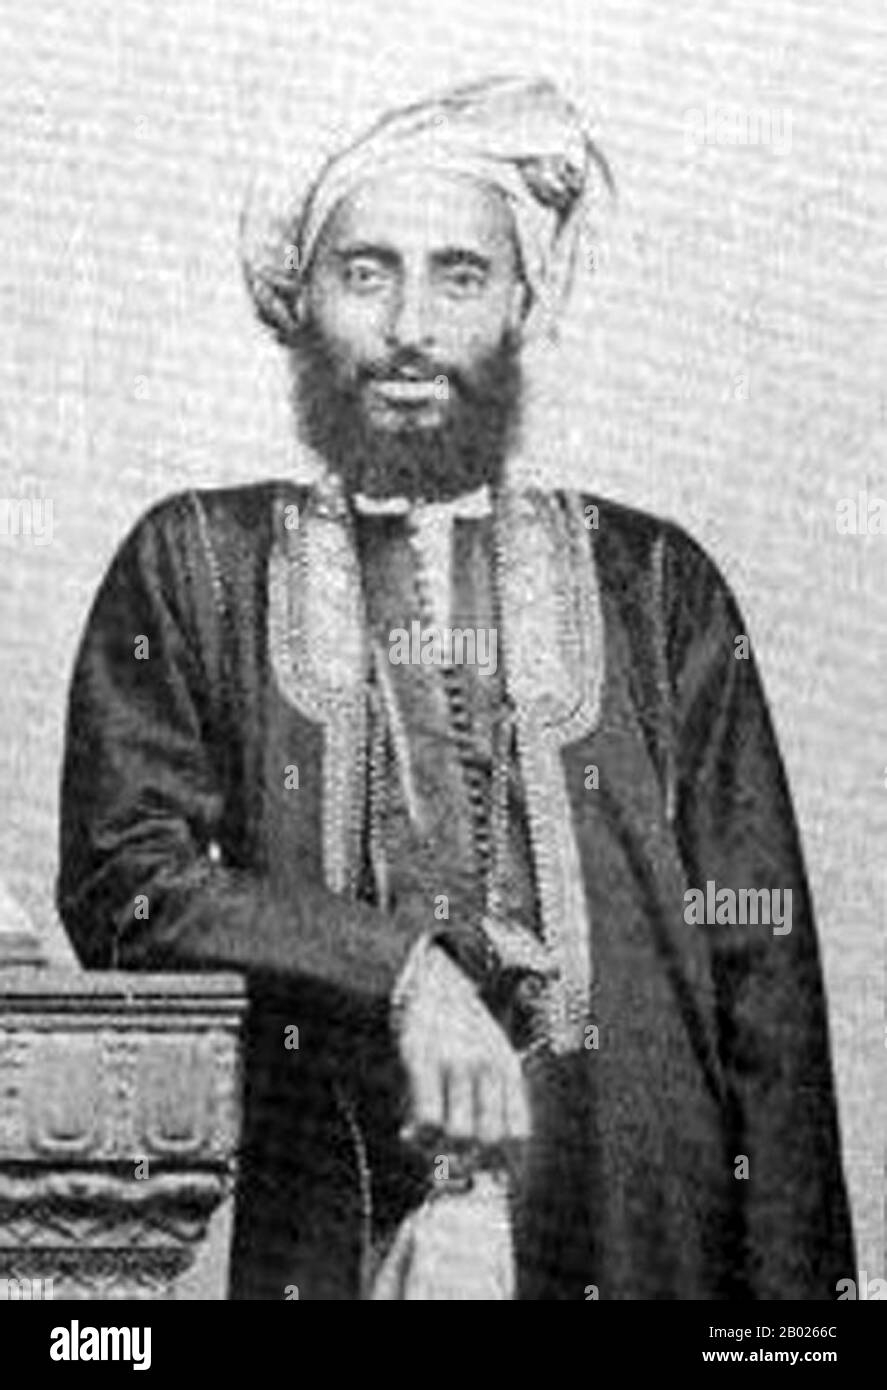 Sayyid Turki bin Said, GCSI (1832 – 4 June 1888) (Arabic: تركي بن سعيد) was Sultan of Muscat and Oman from 30 January 1871 to 4 June 1888. He was the fifth son of Said bin Sultan, Sultan of Muscat and Oman.   On Turki's death, he was succeeded by his second son, Faisal bin Turki. Stock Photo